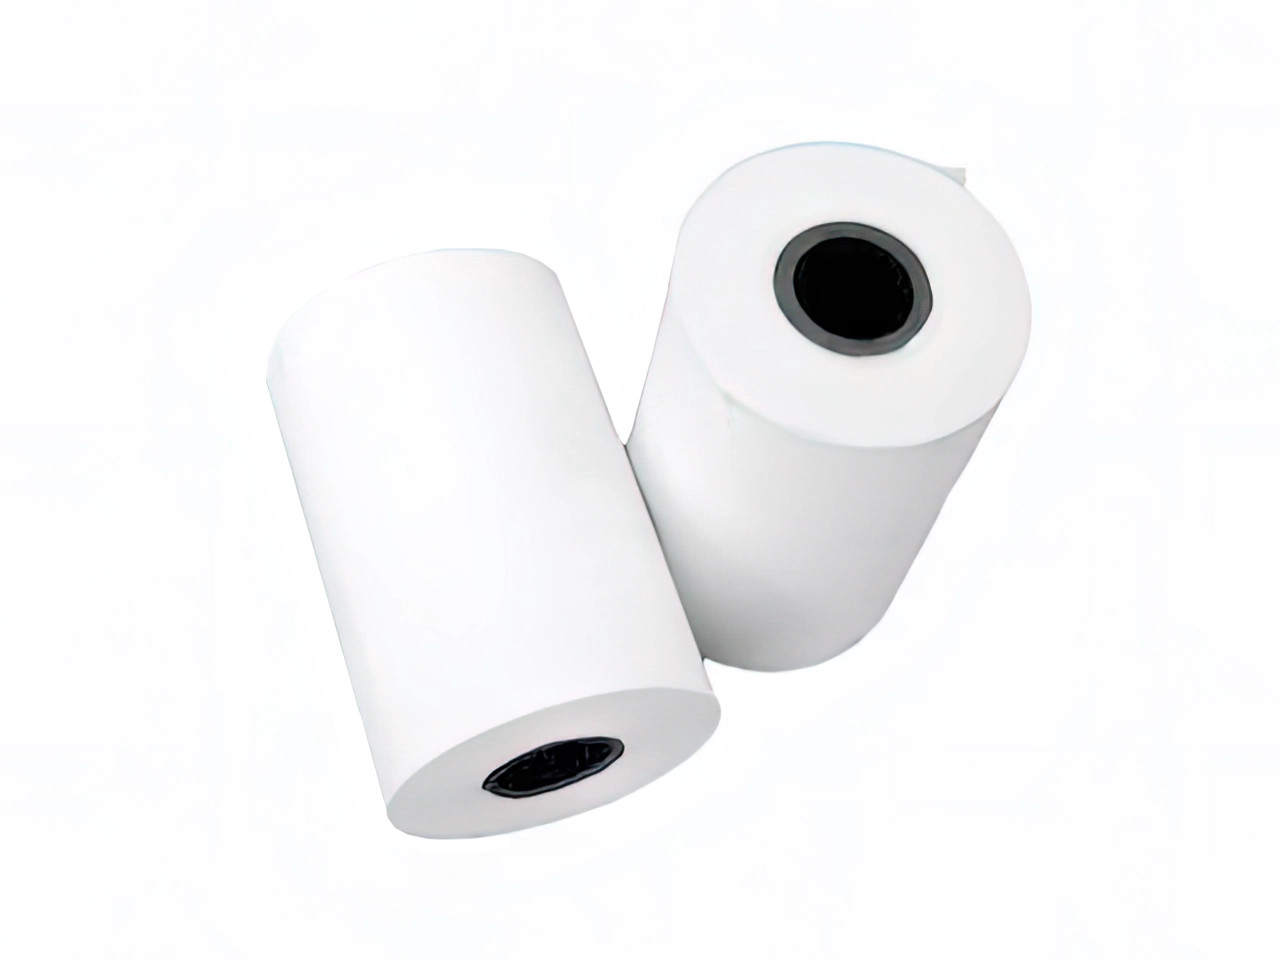 4 Inch Thermal Paper Roll 80mm Manufacturer Thermal Sticker Label Rolls -  China Thermal Paper Rolls, 4 Inch Thermal Paper Roll